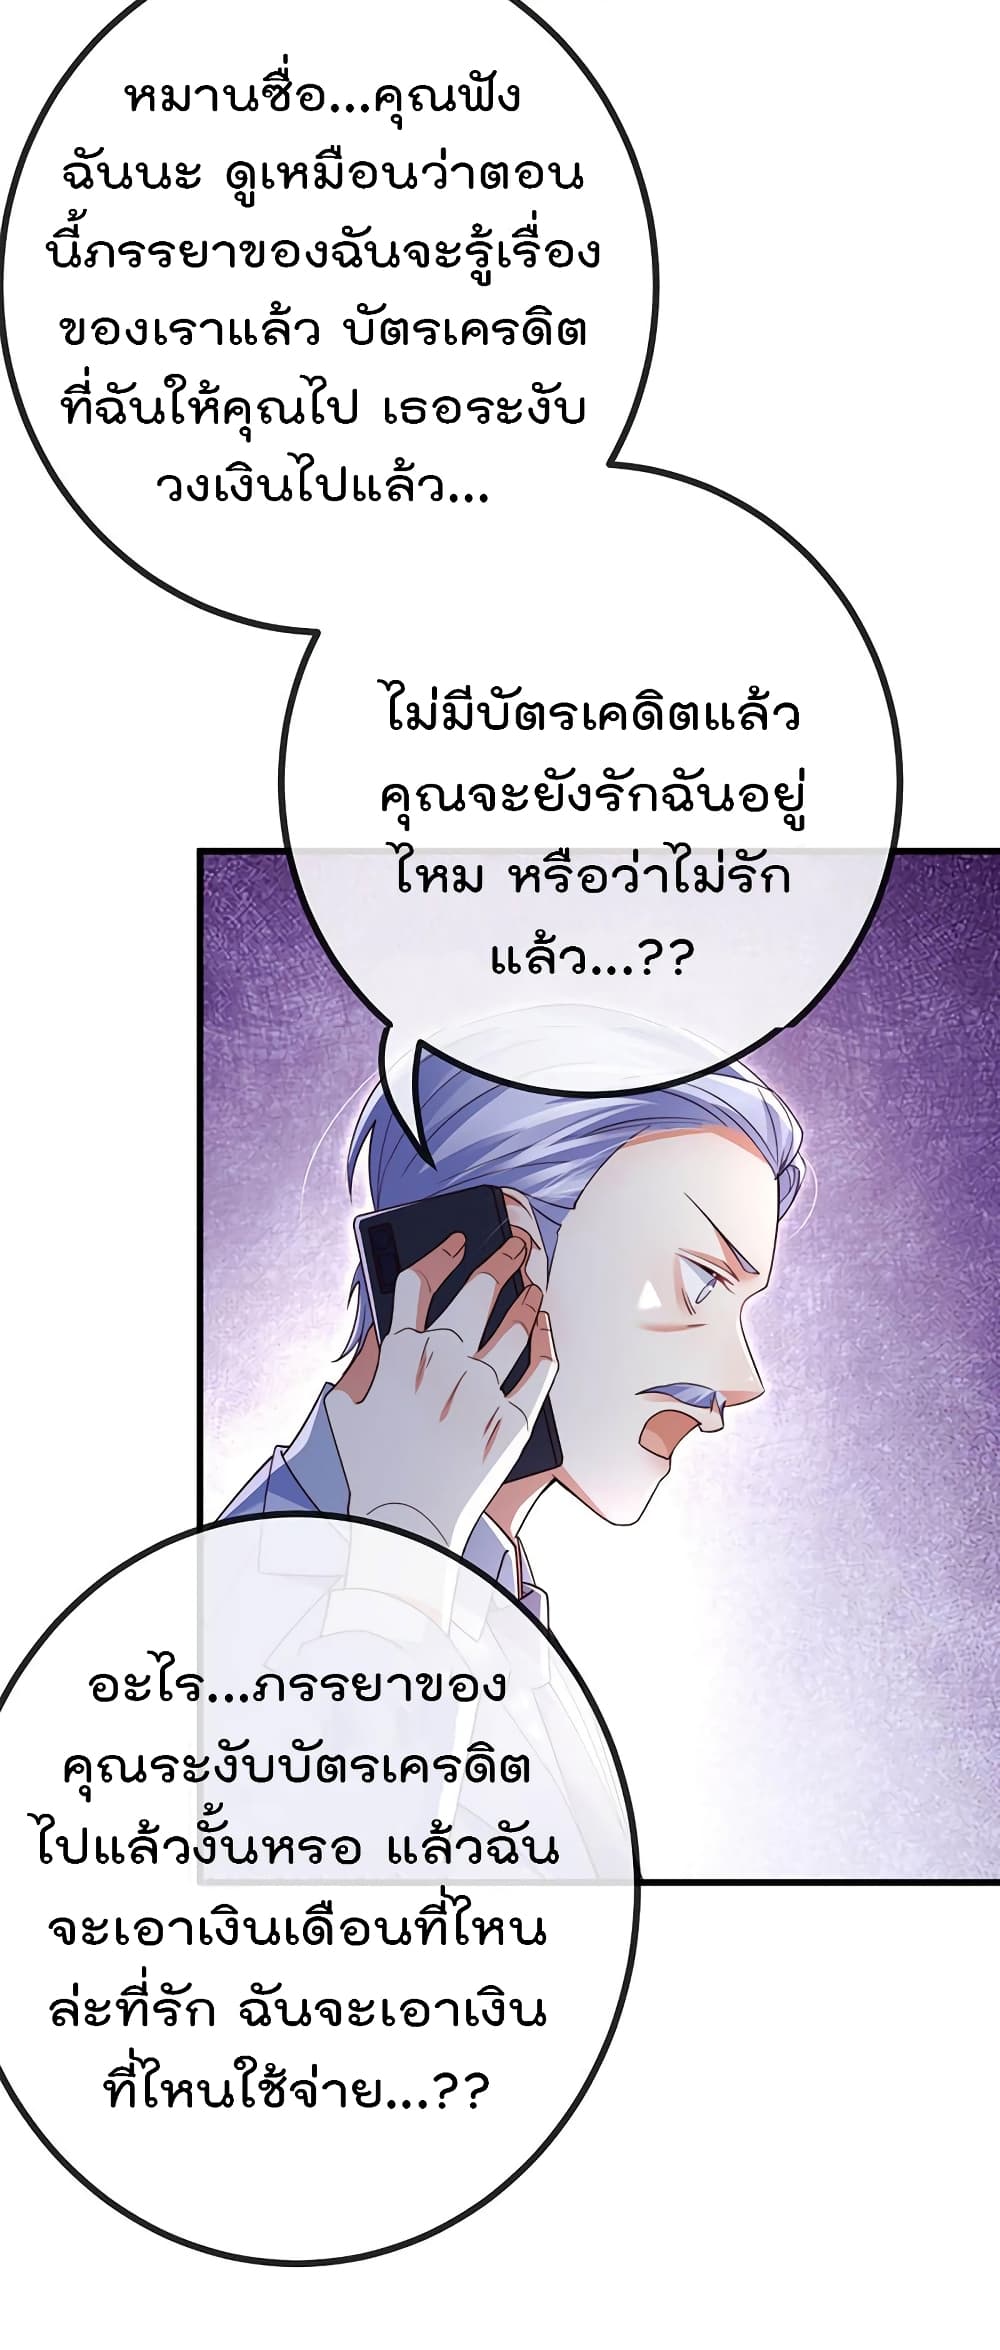 One Hundred Ways to Abuse Scum ตอนที่ 81 (20)